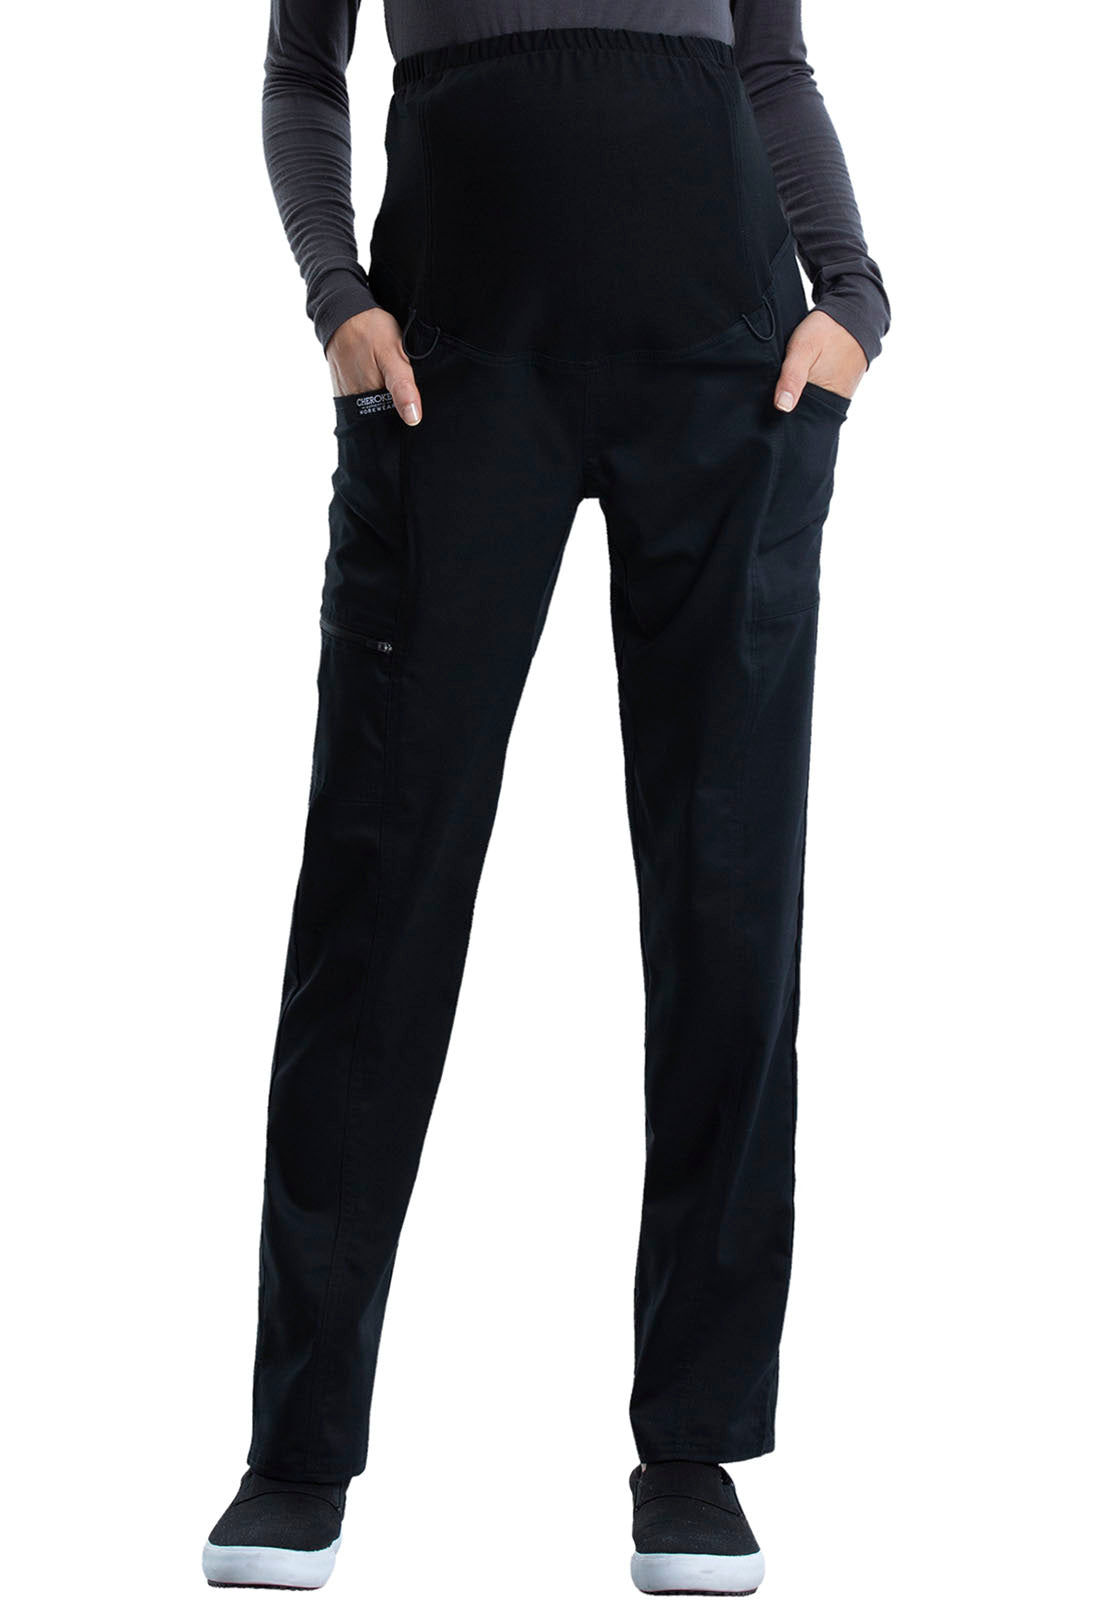 Black Over Belly Tapered Slim Fit Work Pants – One Hott Mamma Maternity